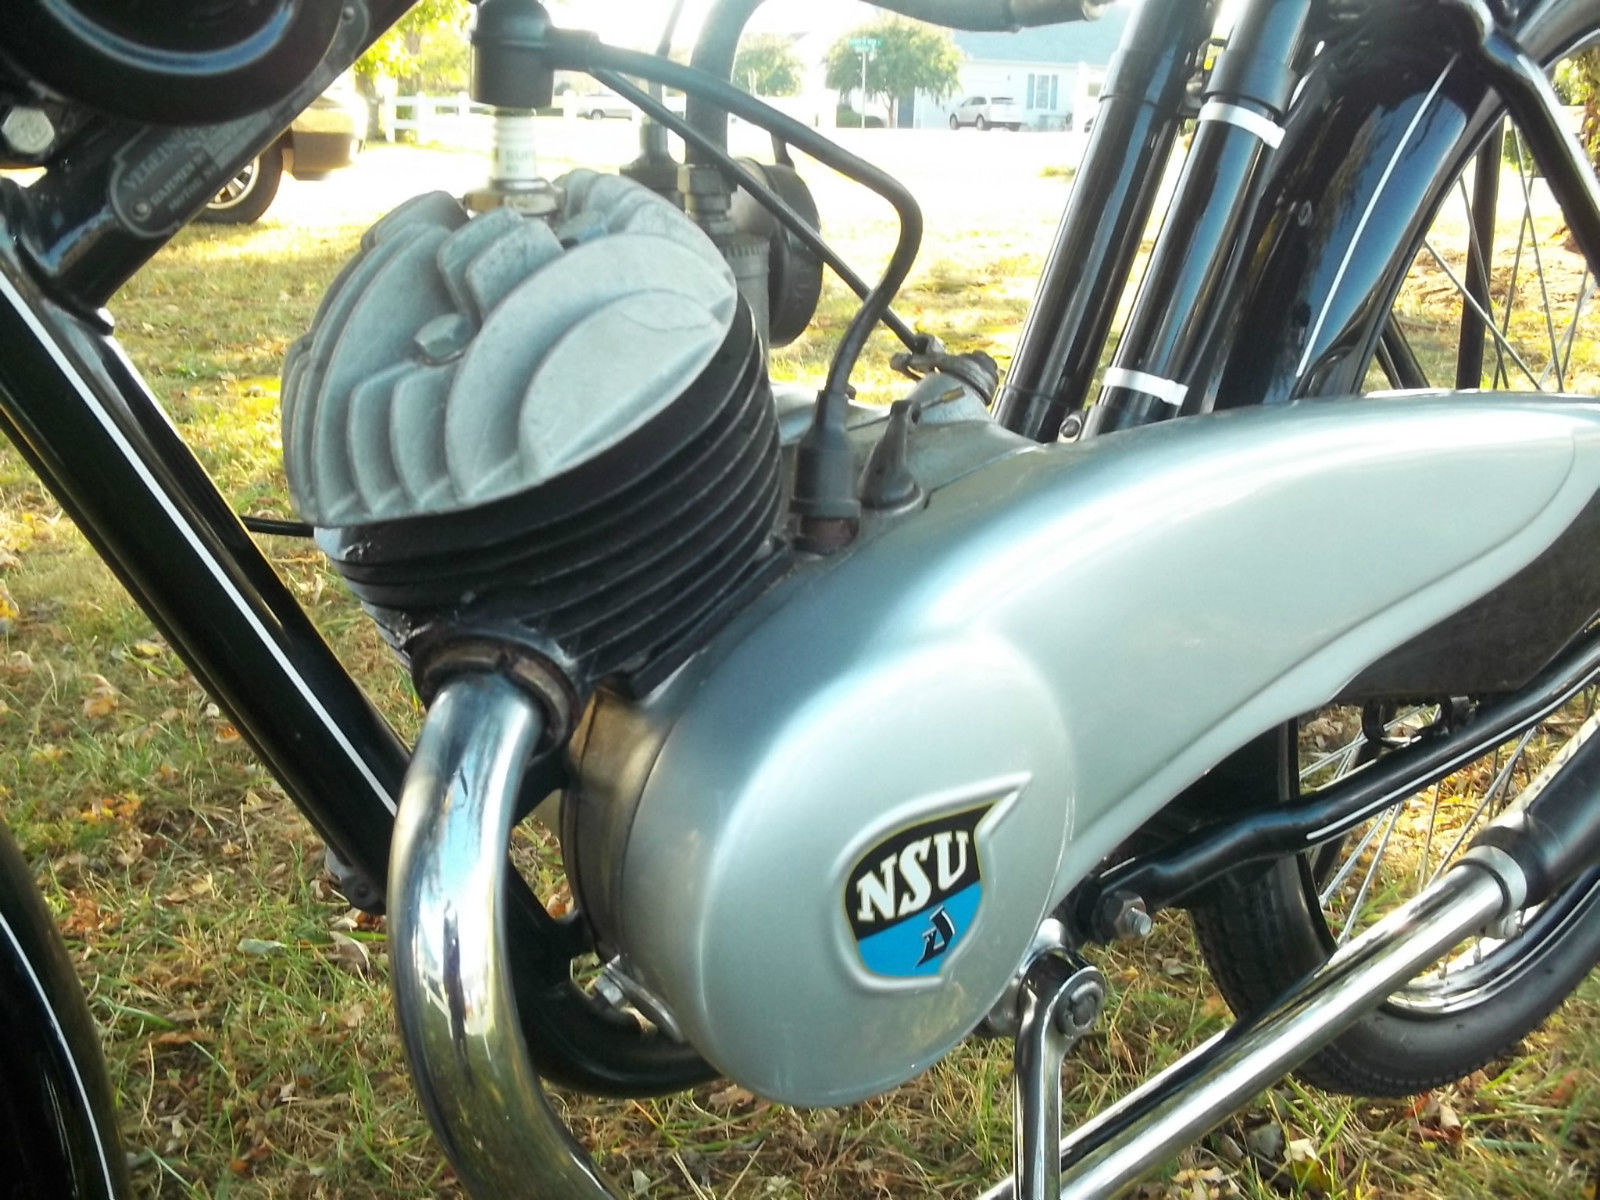 NSU Quick - 1936 - Engine, Cylinder Head, Exhaust and Side Cover.